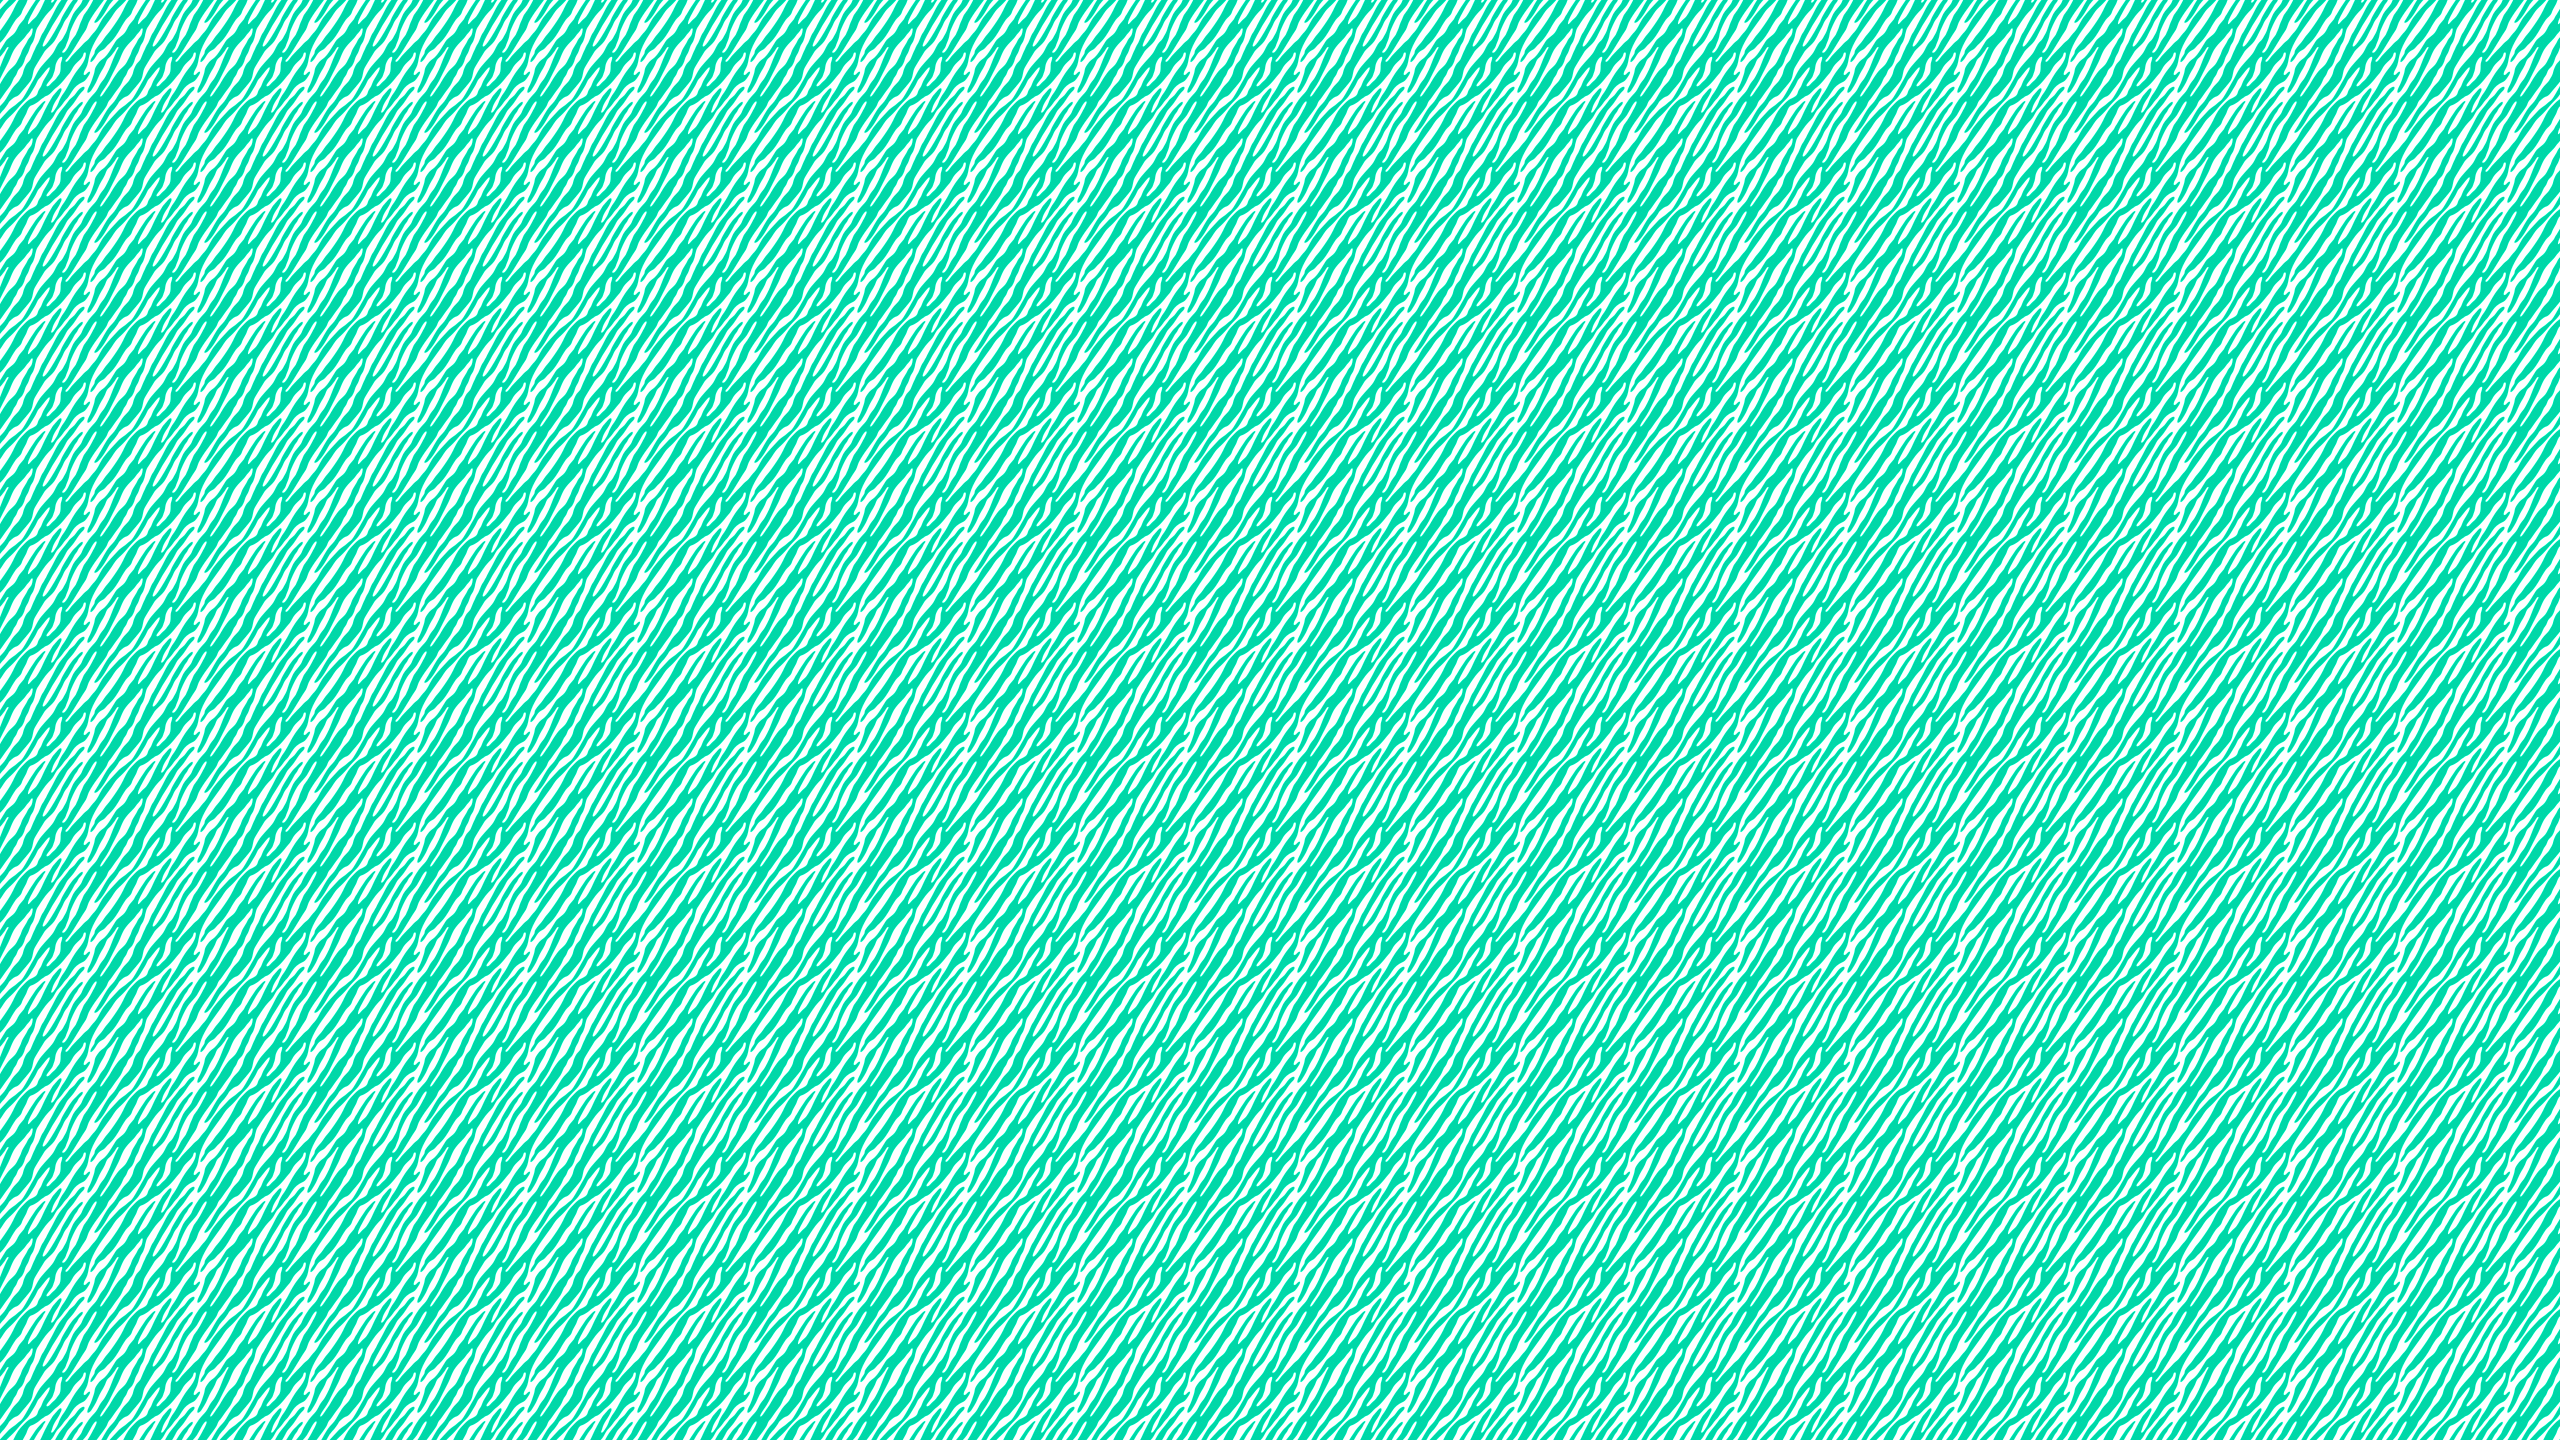 This Teal Zebra Desktop Wallpaper Is Easy Just Save The